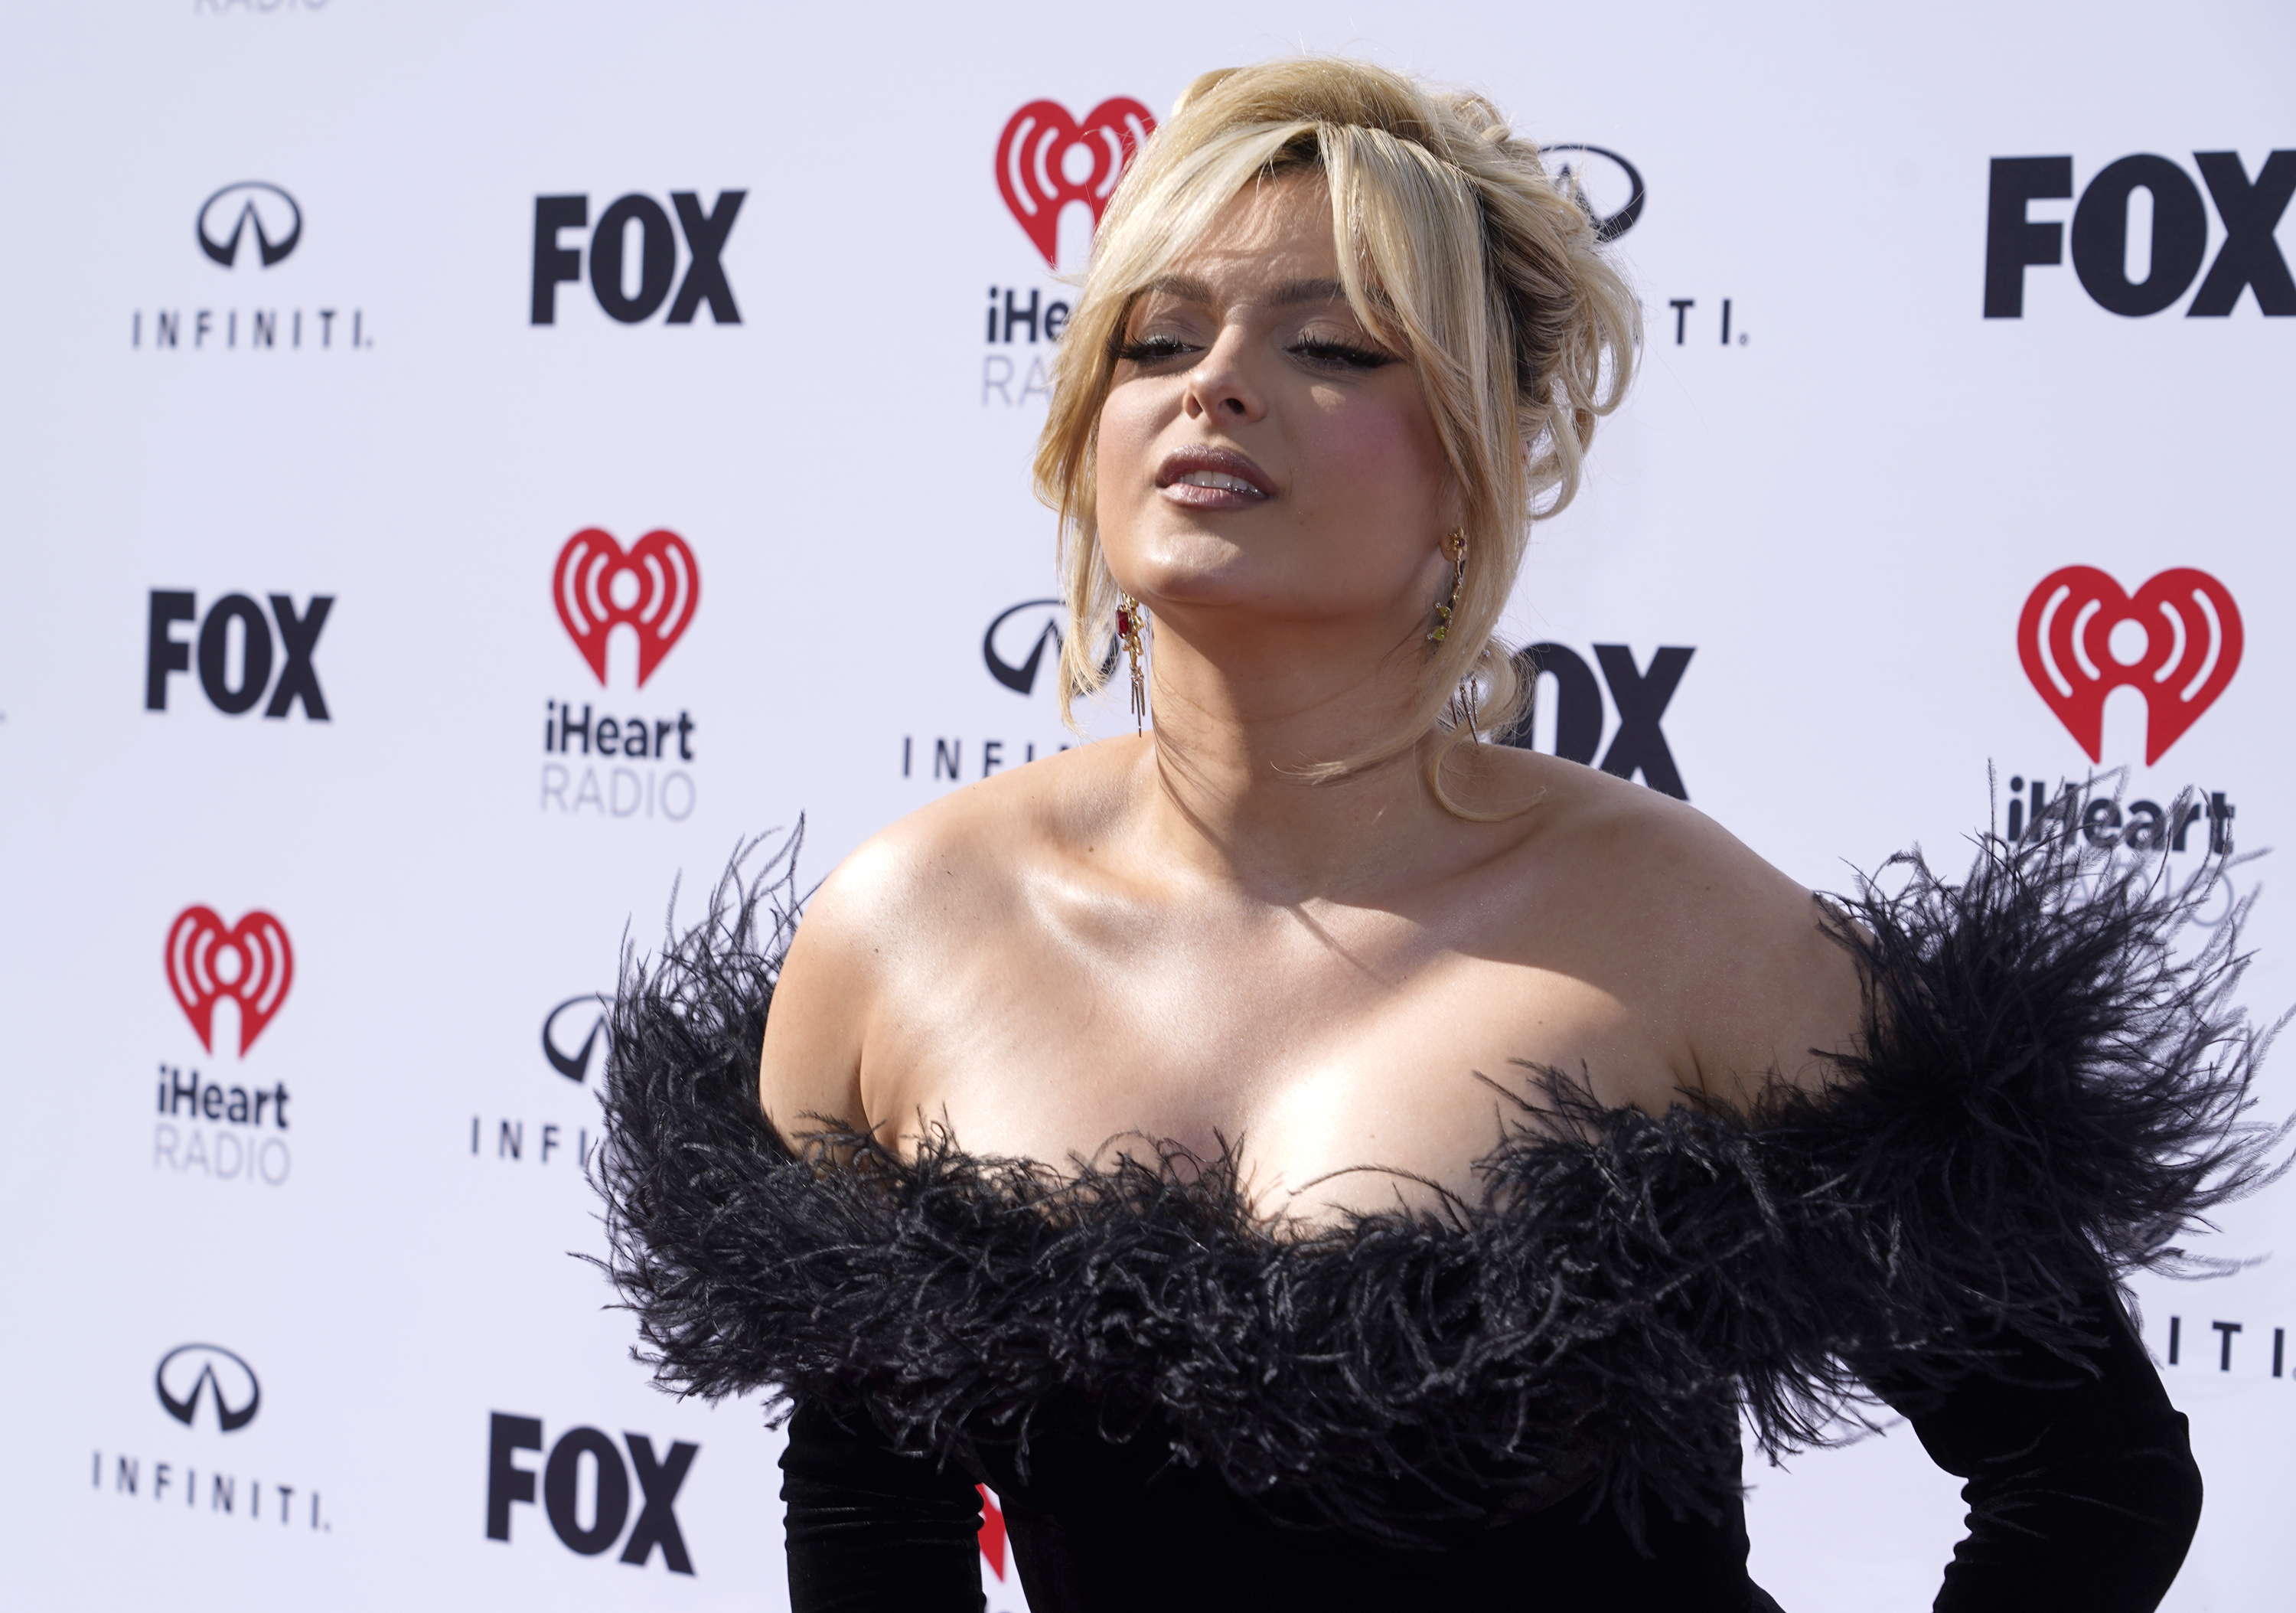 Bebe Rexha Opens Up About Struggles with Body Image